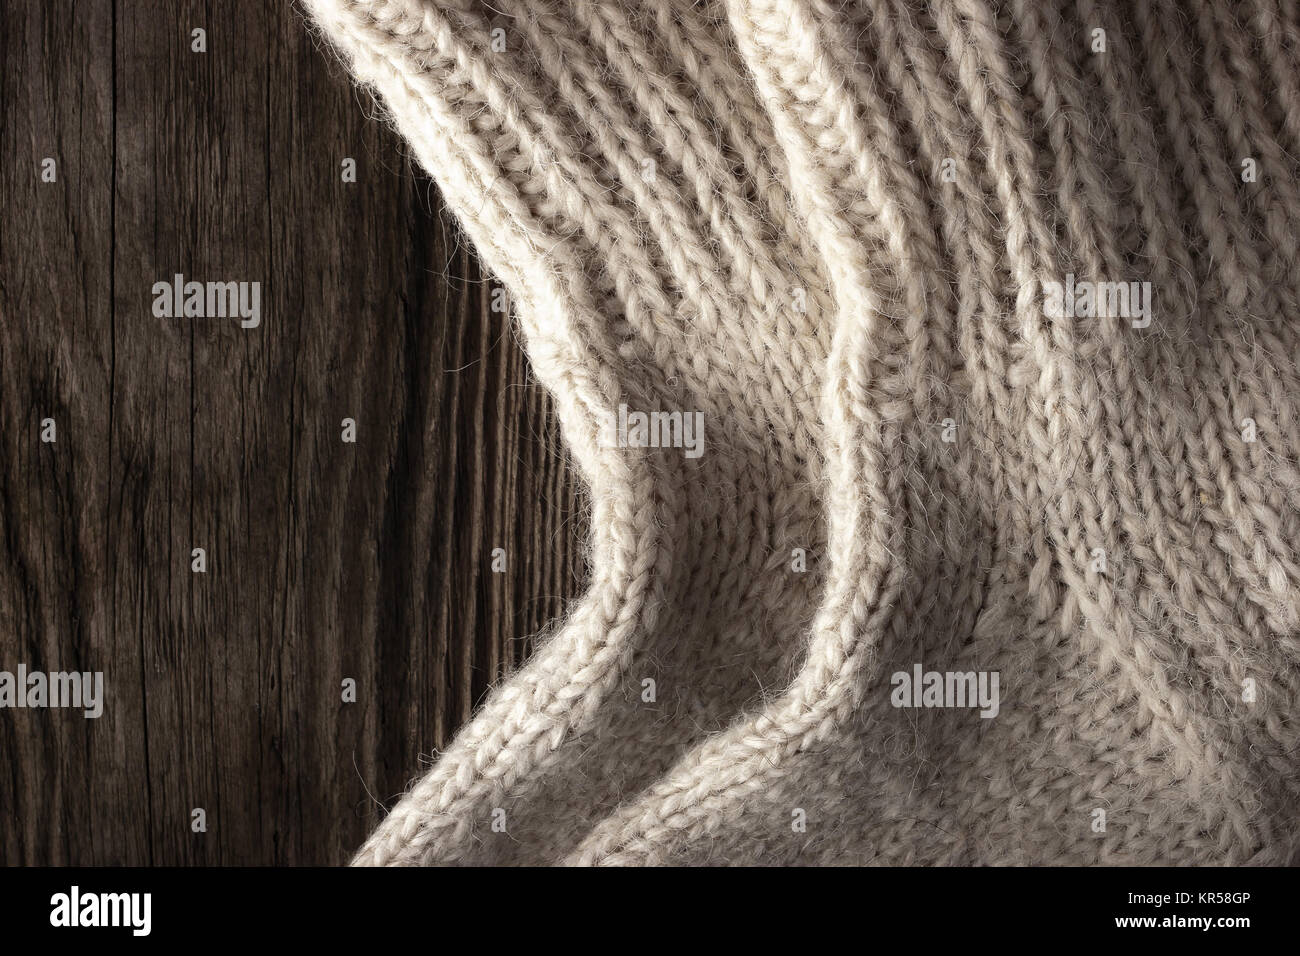 Knitted wool socks on the wooden background Stock Photo